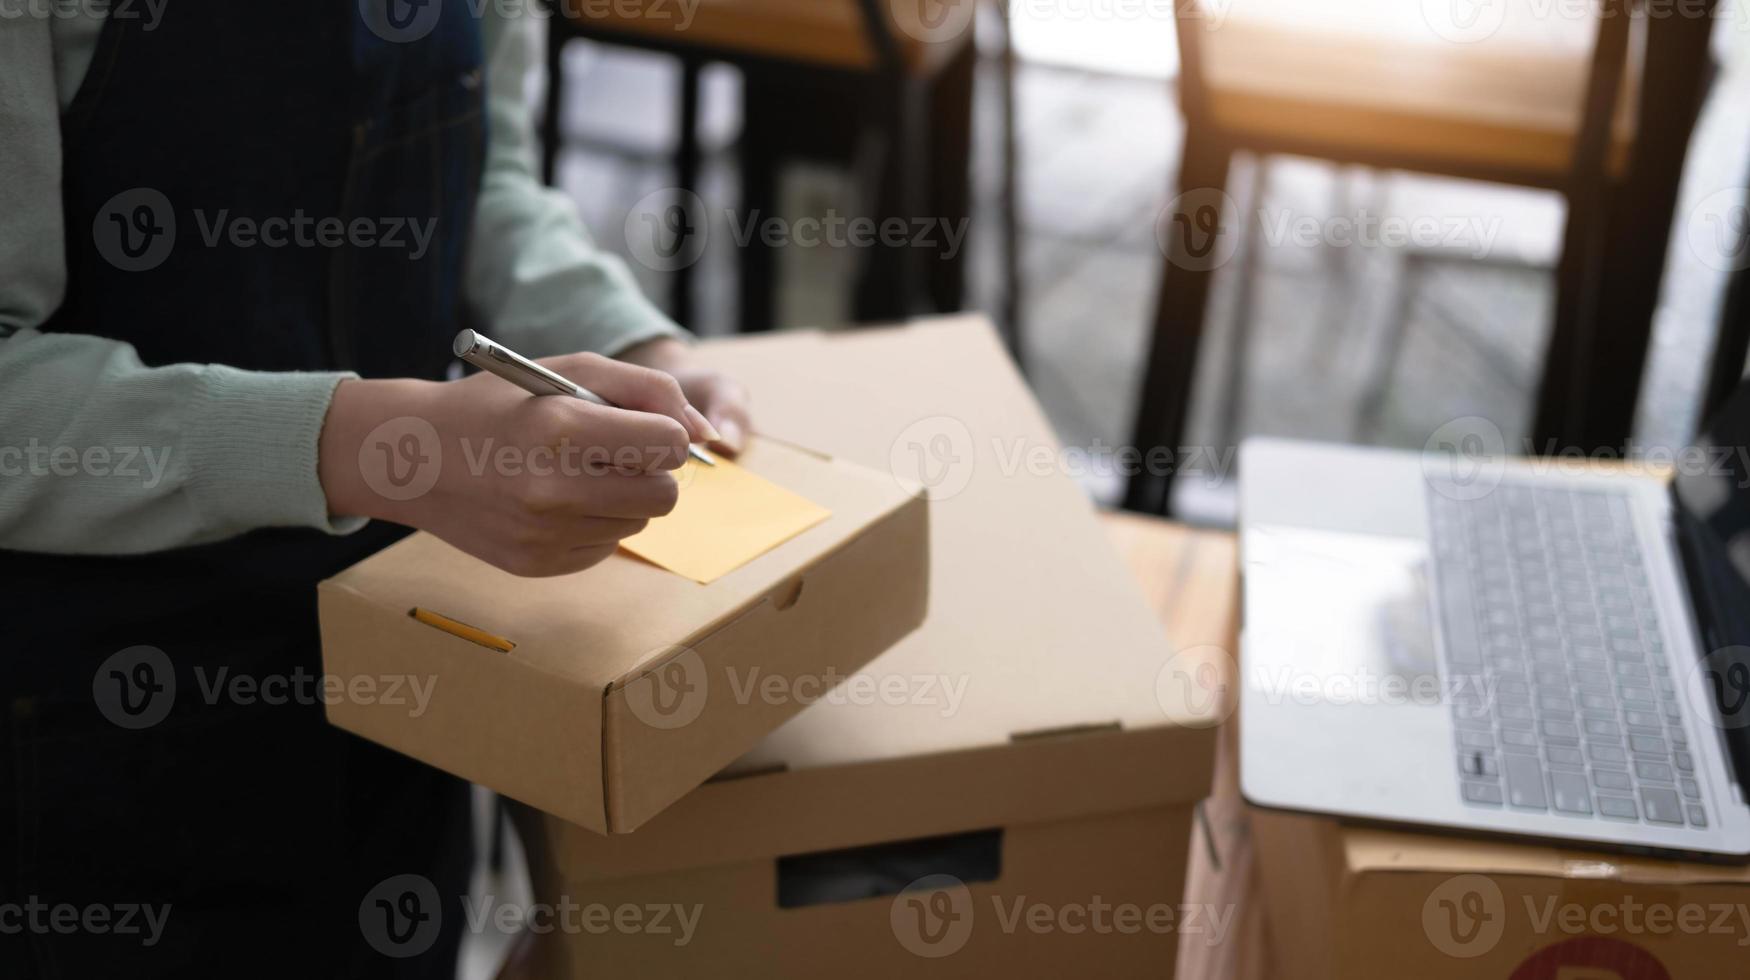 Startup Entrepreneurship Small Business SME Freelance Young lady working at home with boxes and laptop online Marketing Packaging SME Shipping Ecommerce Concepts photo